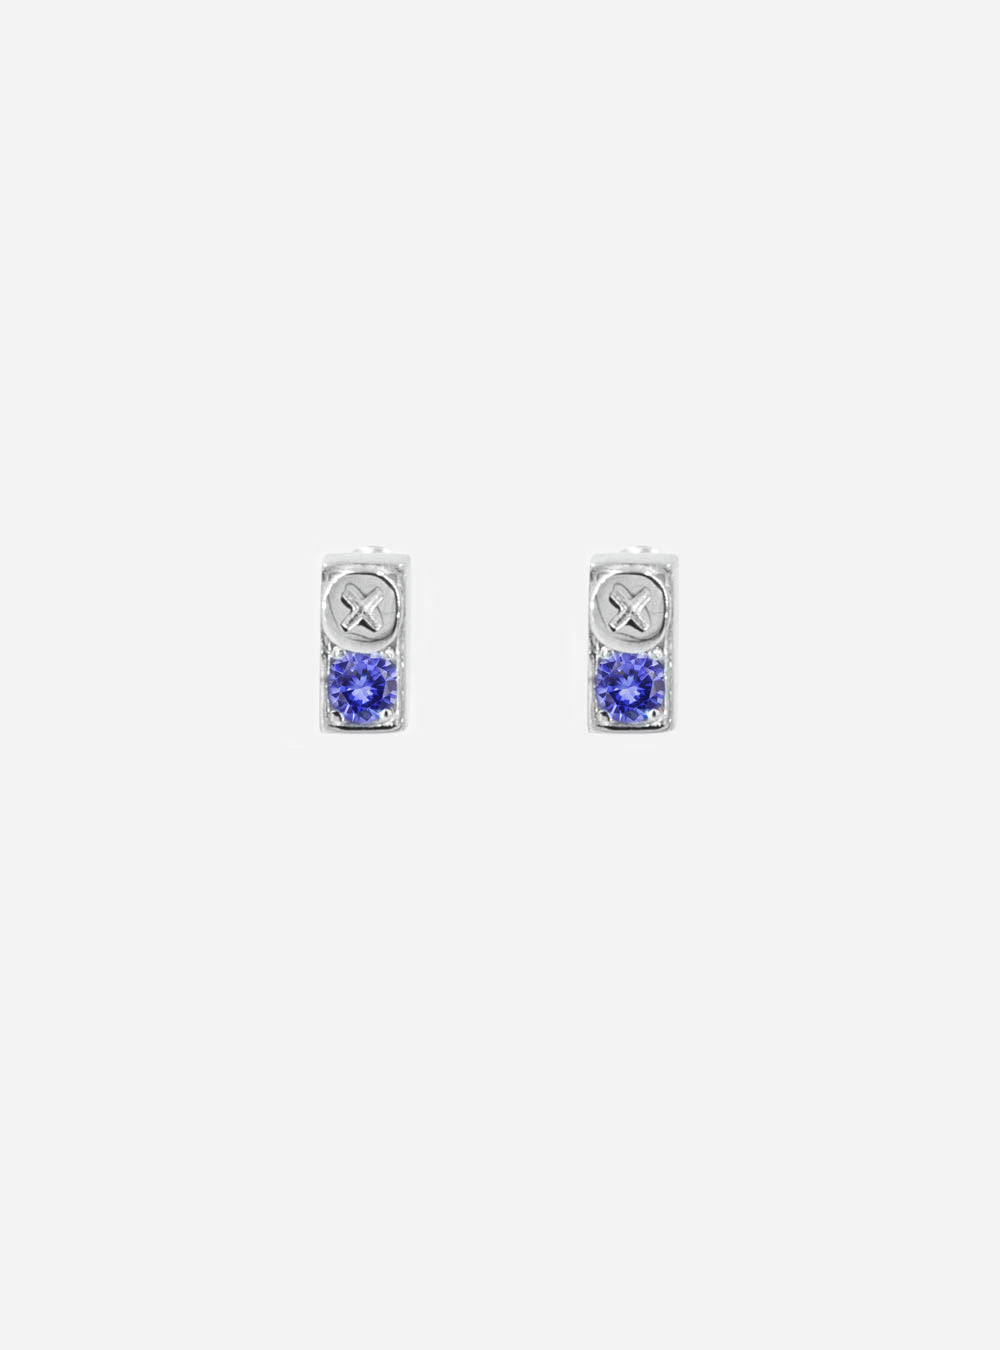 a pair of MIDNIGHTFACTORY Screwbox sapphire earrings with blue sapphires and diamonds.